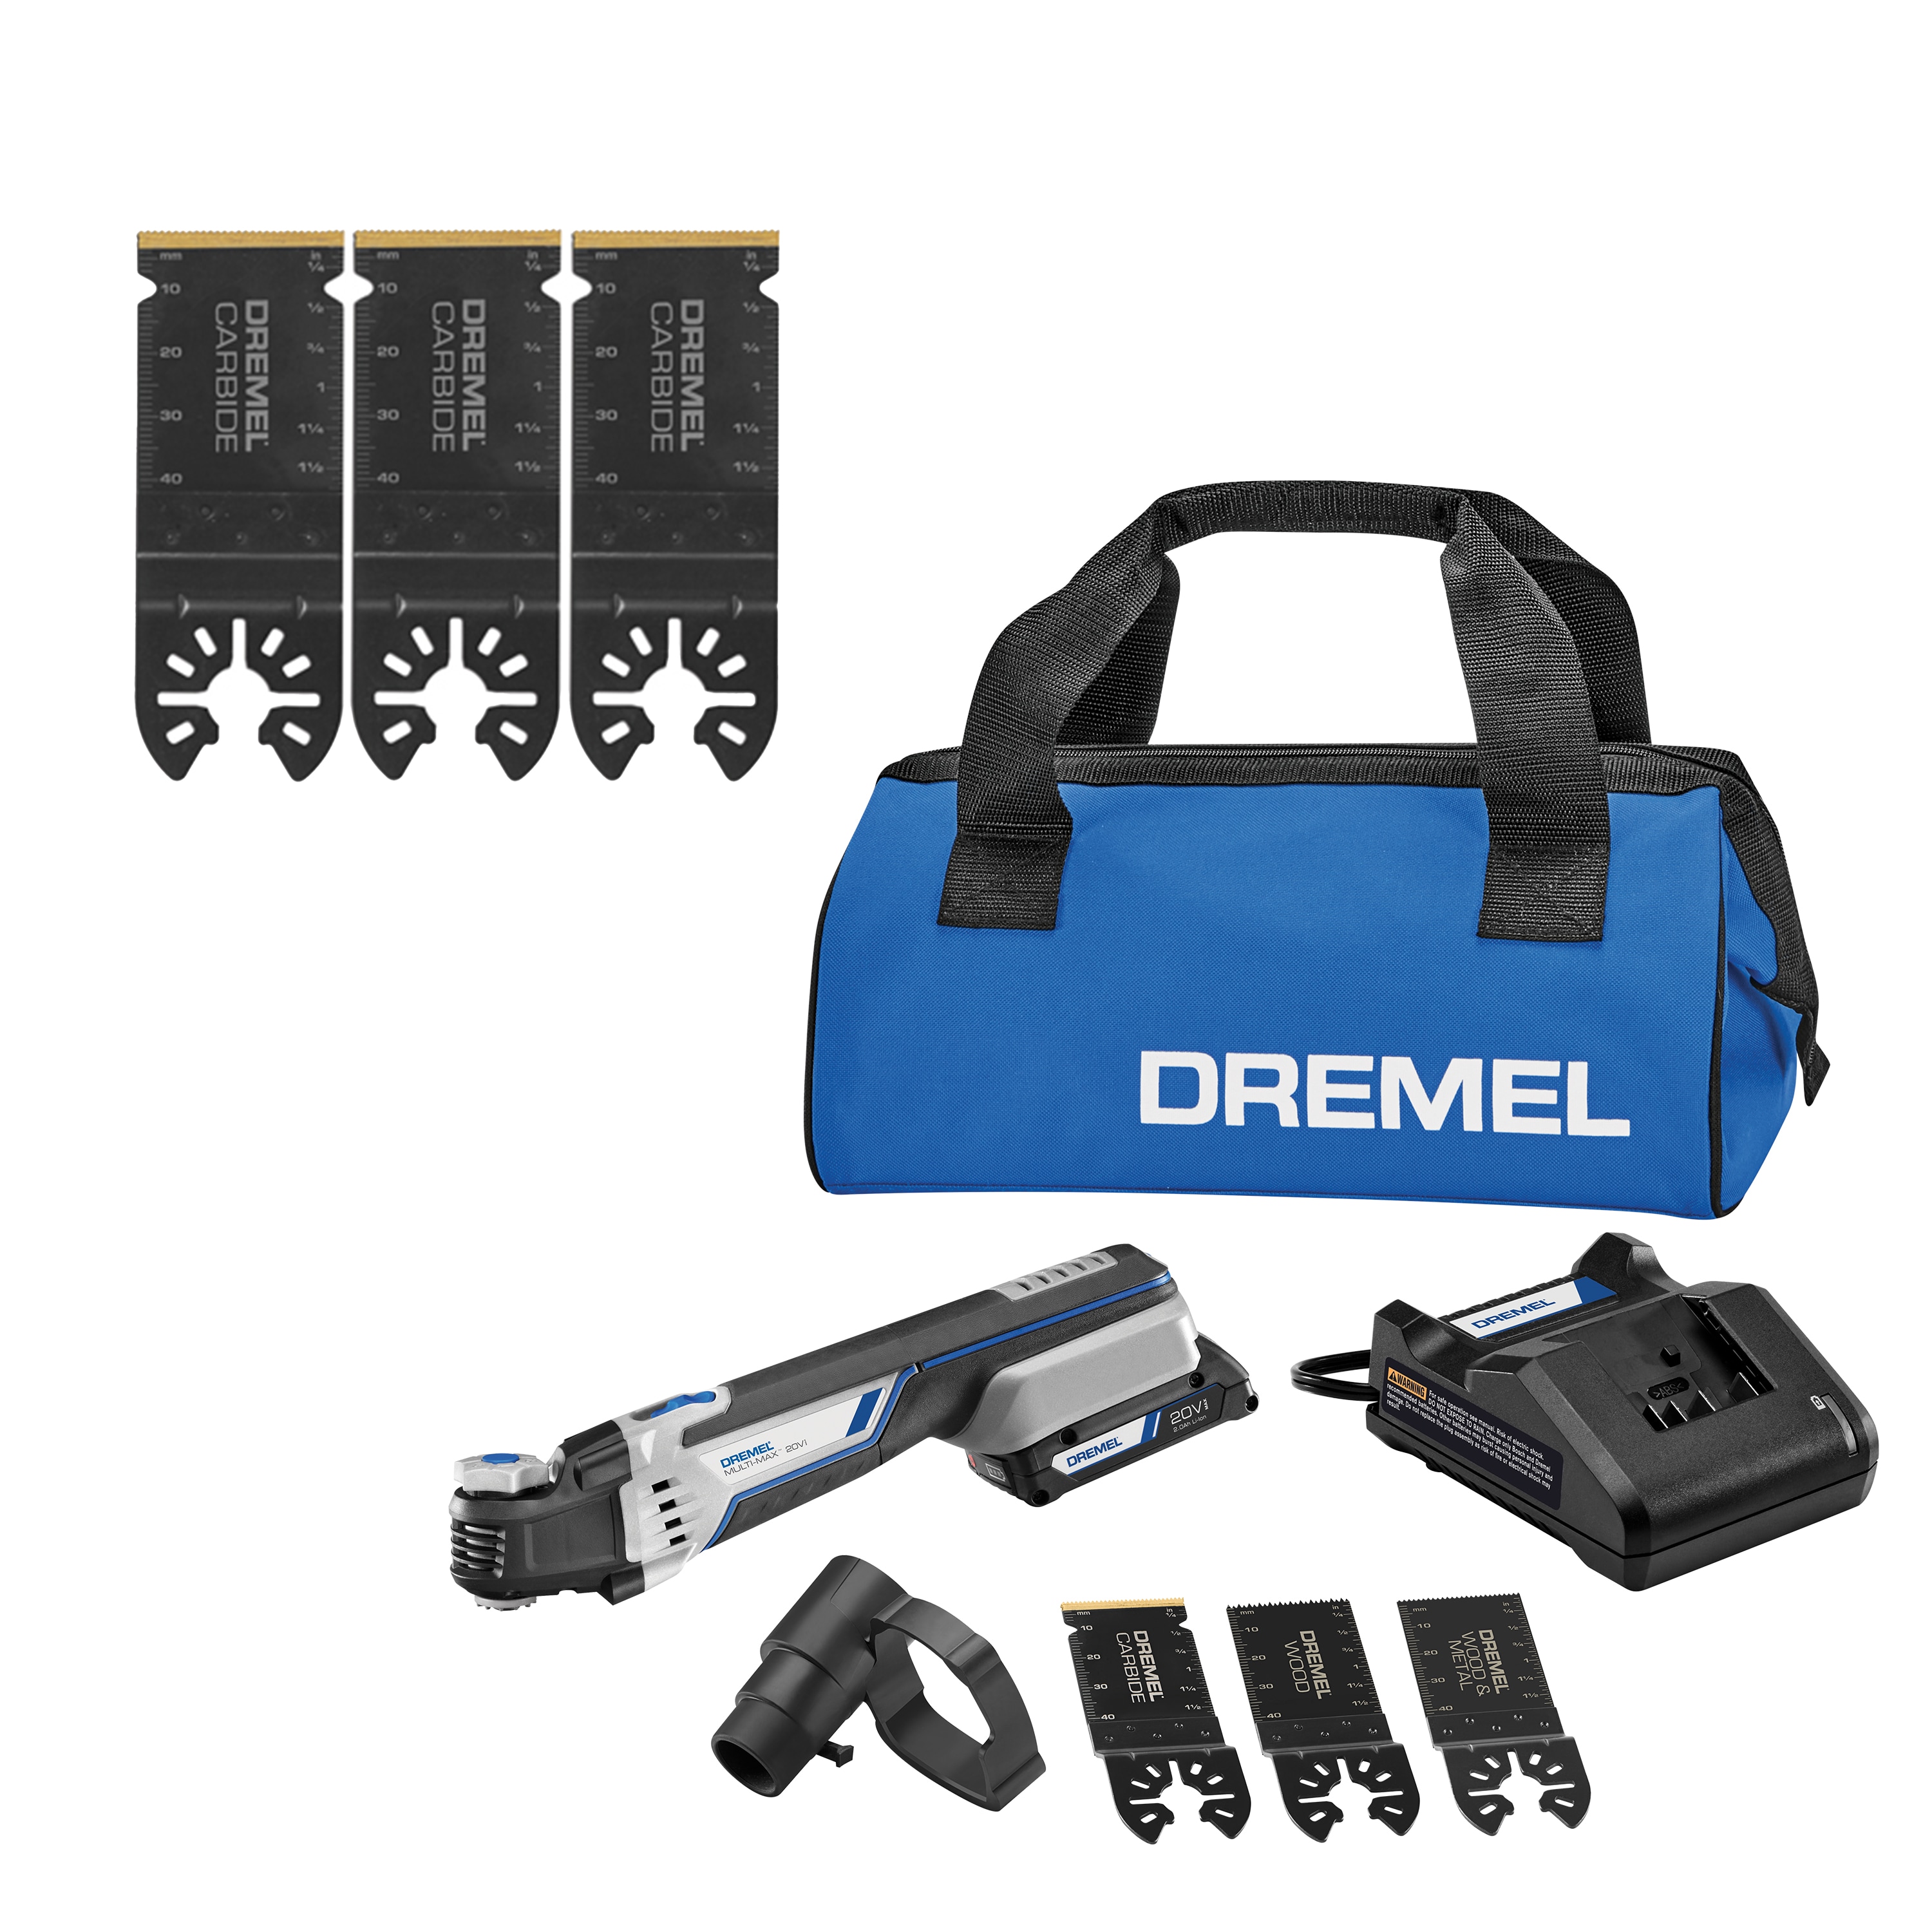 Dremel Multi-Max 20V Variable Speed Cordless Oscillating Multi-Tool Kit with 3 Blades + 3-Pack Carbide Blades